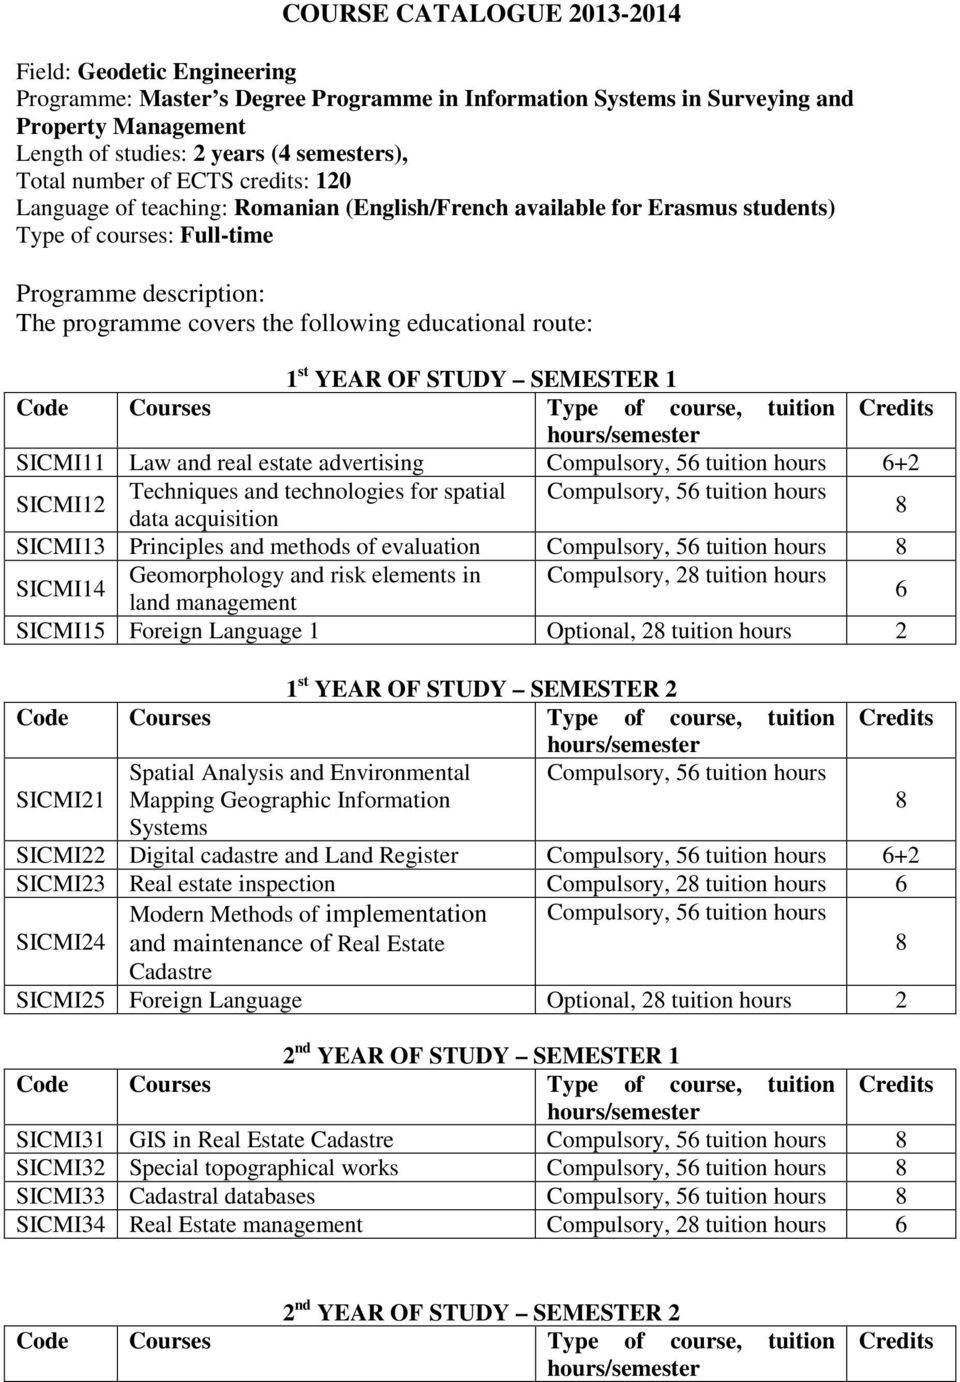 educational route: 1 st YEAR OF STUDY SEMESTER 1 SICMI11 Law and real estate advertising Compulsory, tuition hours 6+2 SICMI12 Techniques and technologies for spatial Compulsory, tuition hours data